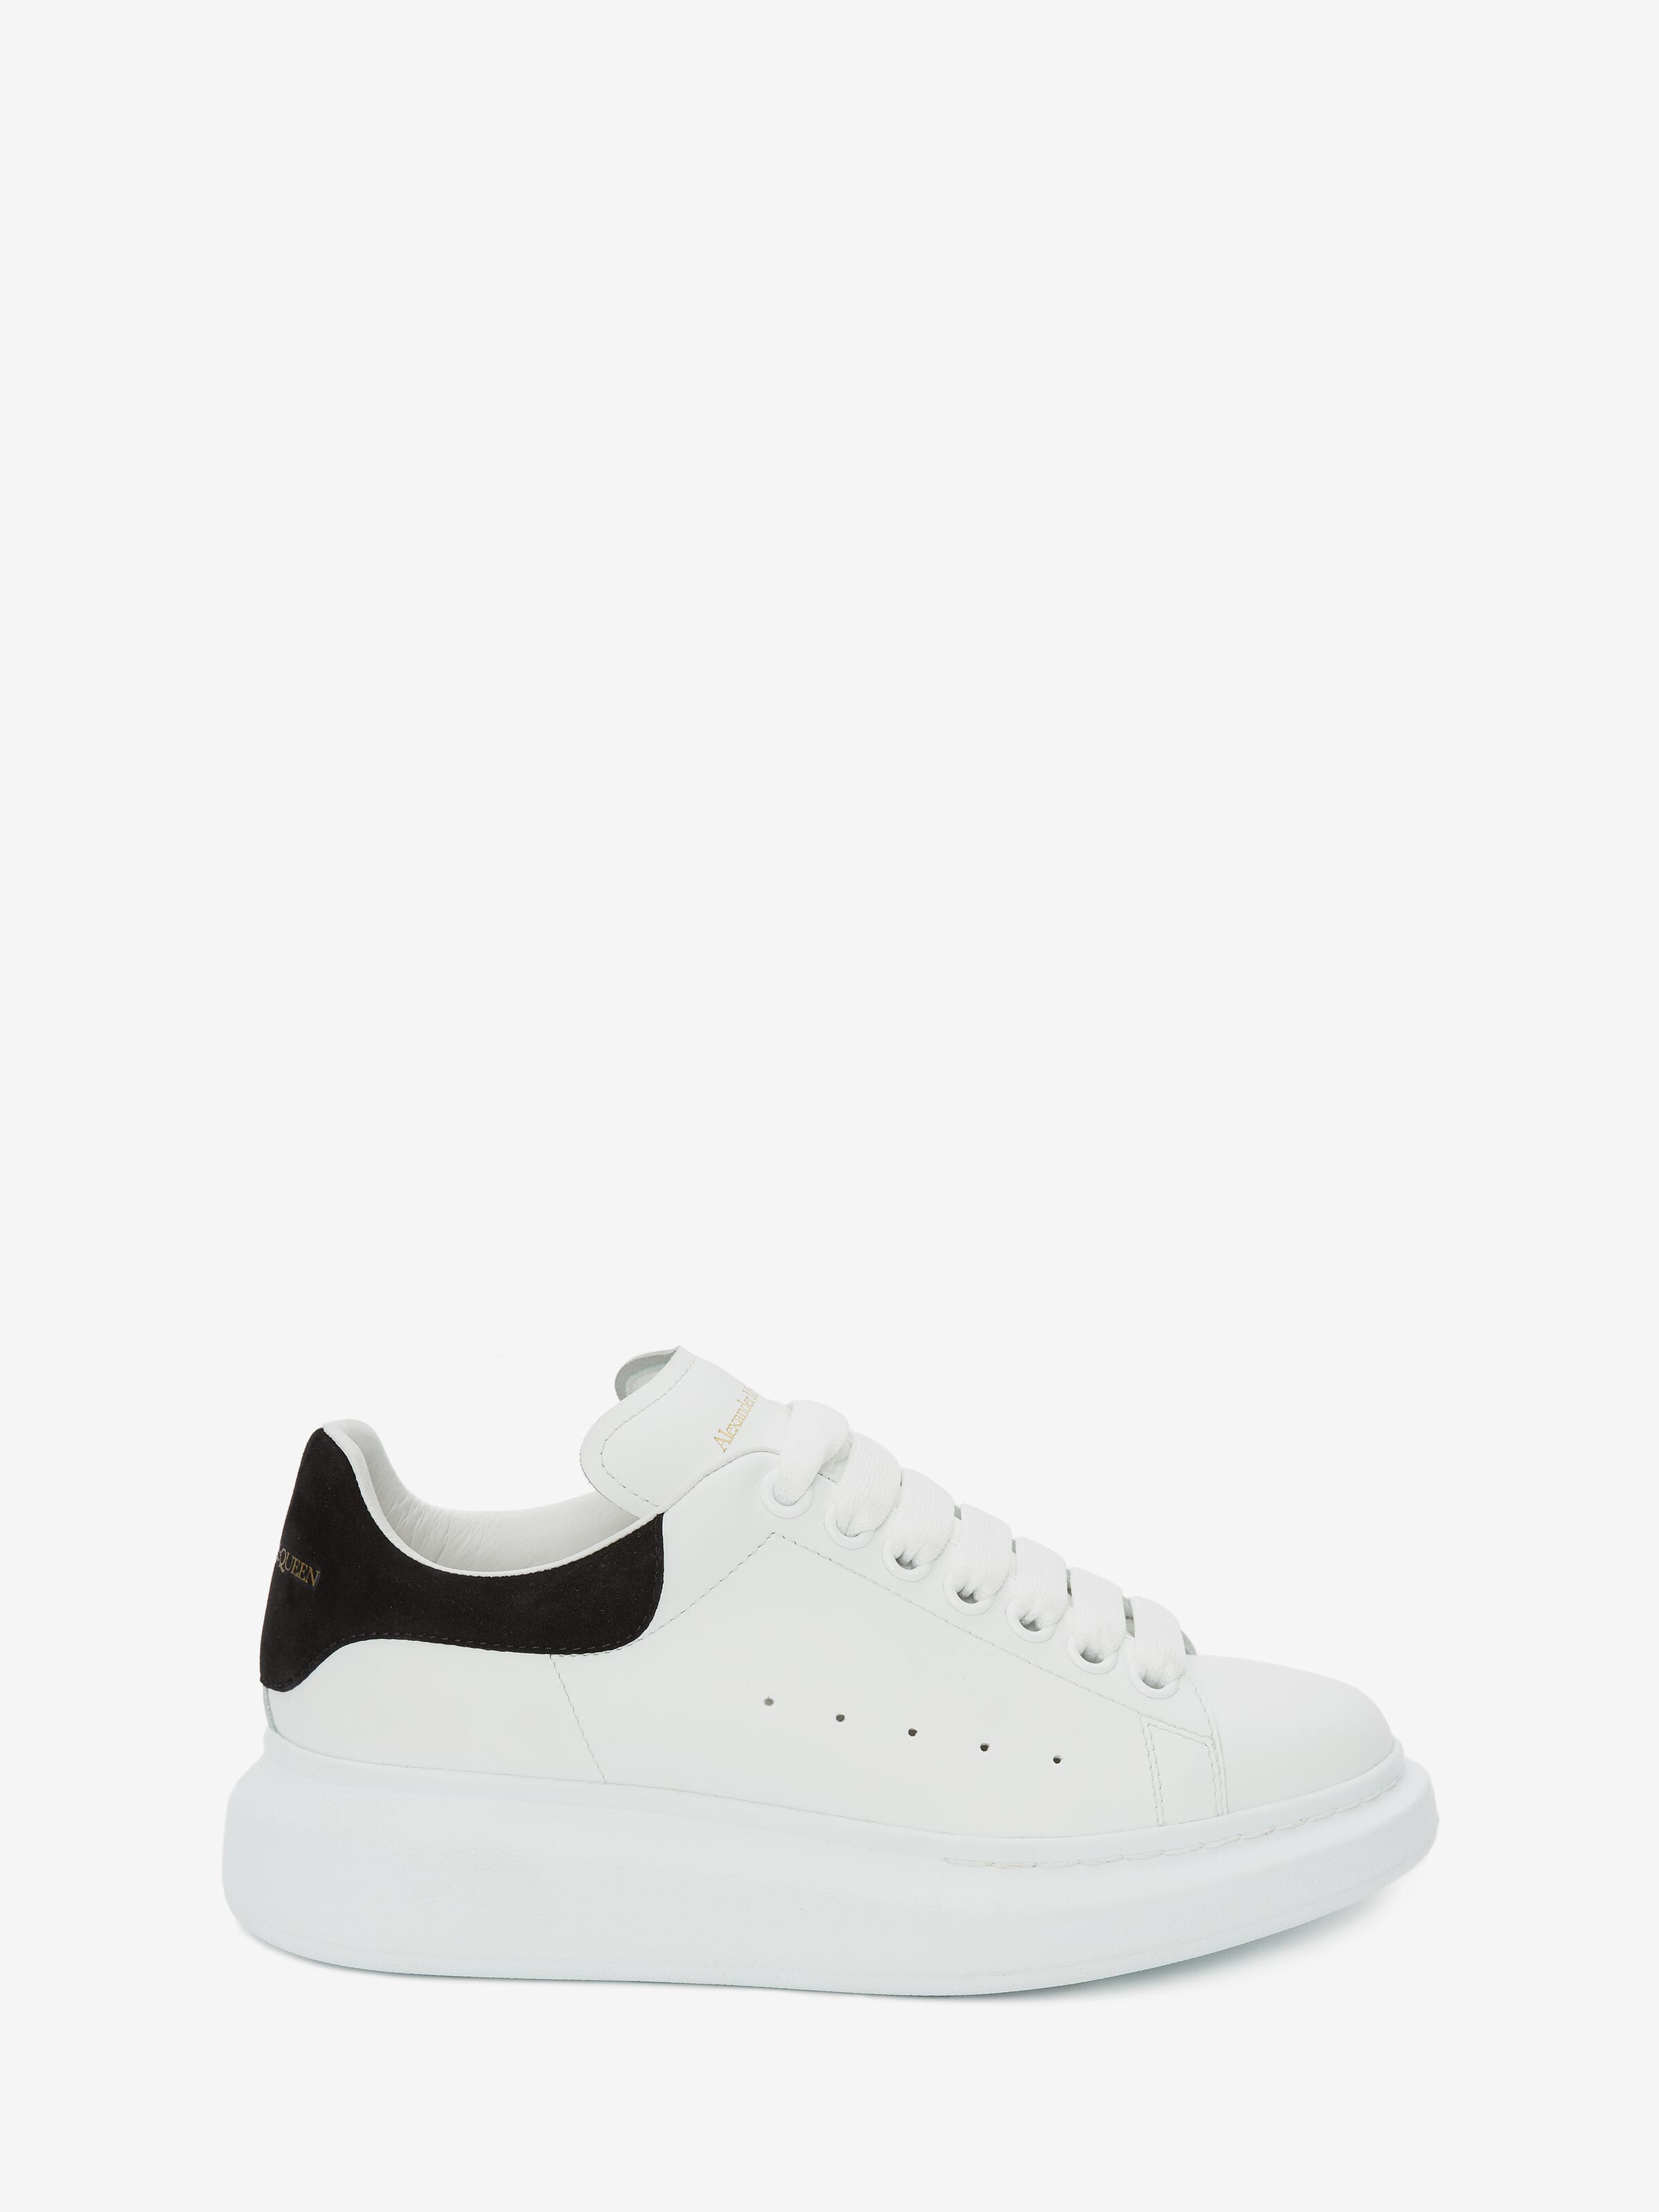 extract Team up with principle Oversized Sneaker in White/Black | Alexander McQueen US